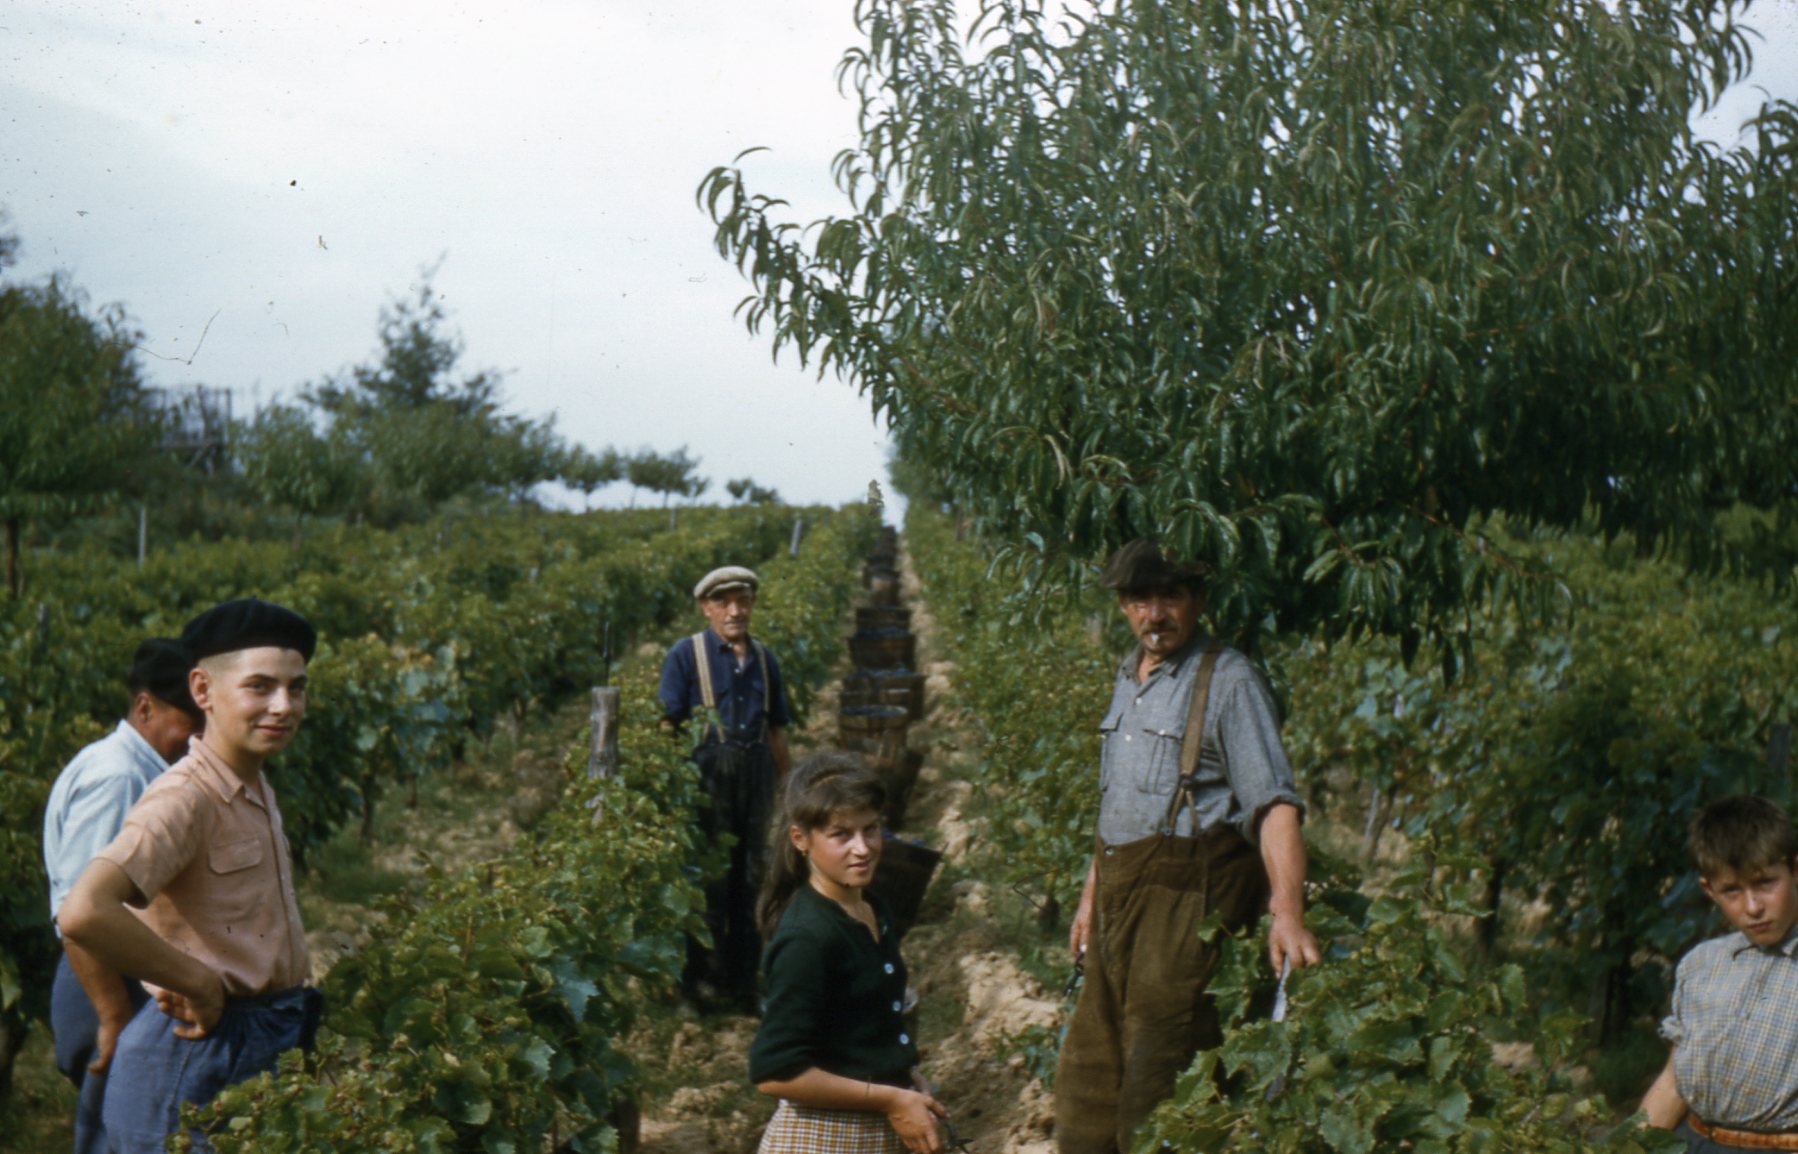 Culture of the vine. The time of the grape harvest is there. The tree on the line is a peach tree. The grape harvest was not mechanical for a better preservation of grapewines and all the village took part. South-west of France circa 50. Bordeaux area. View full size.